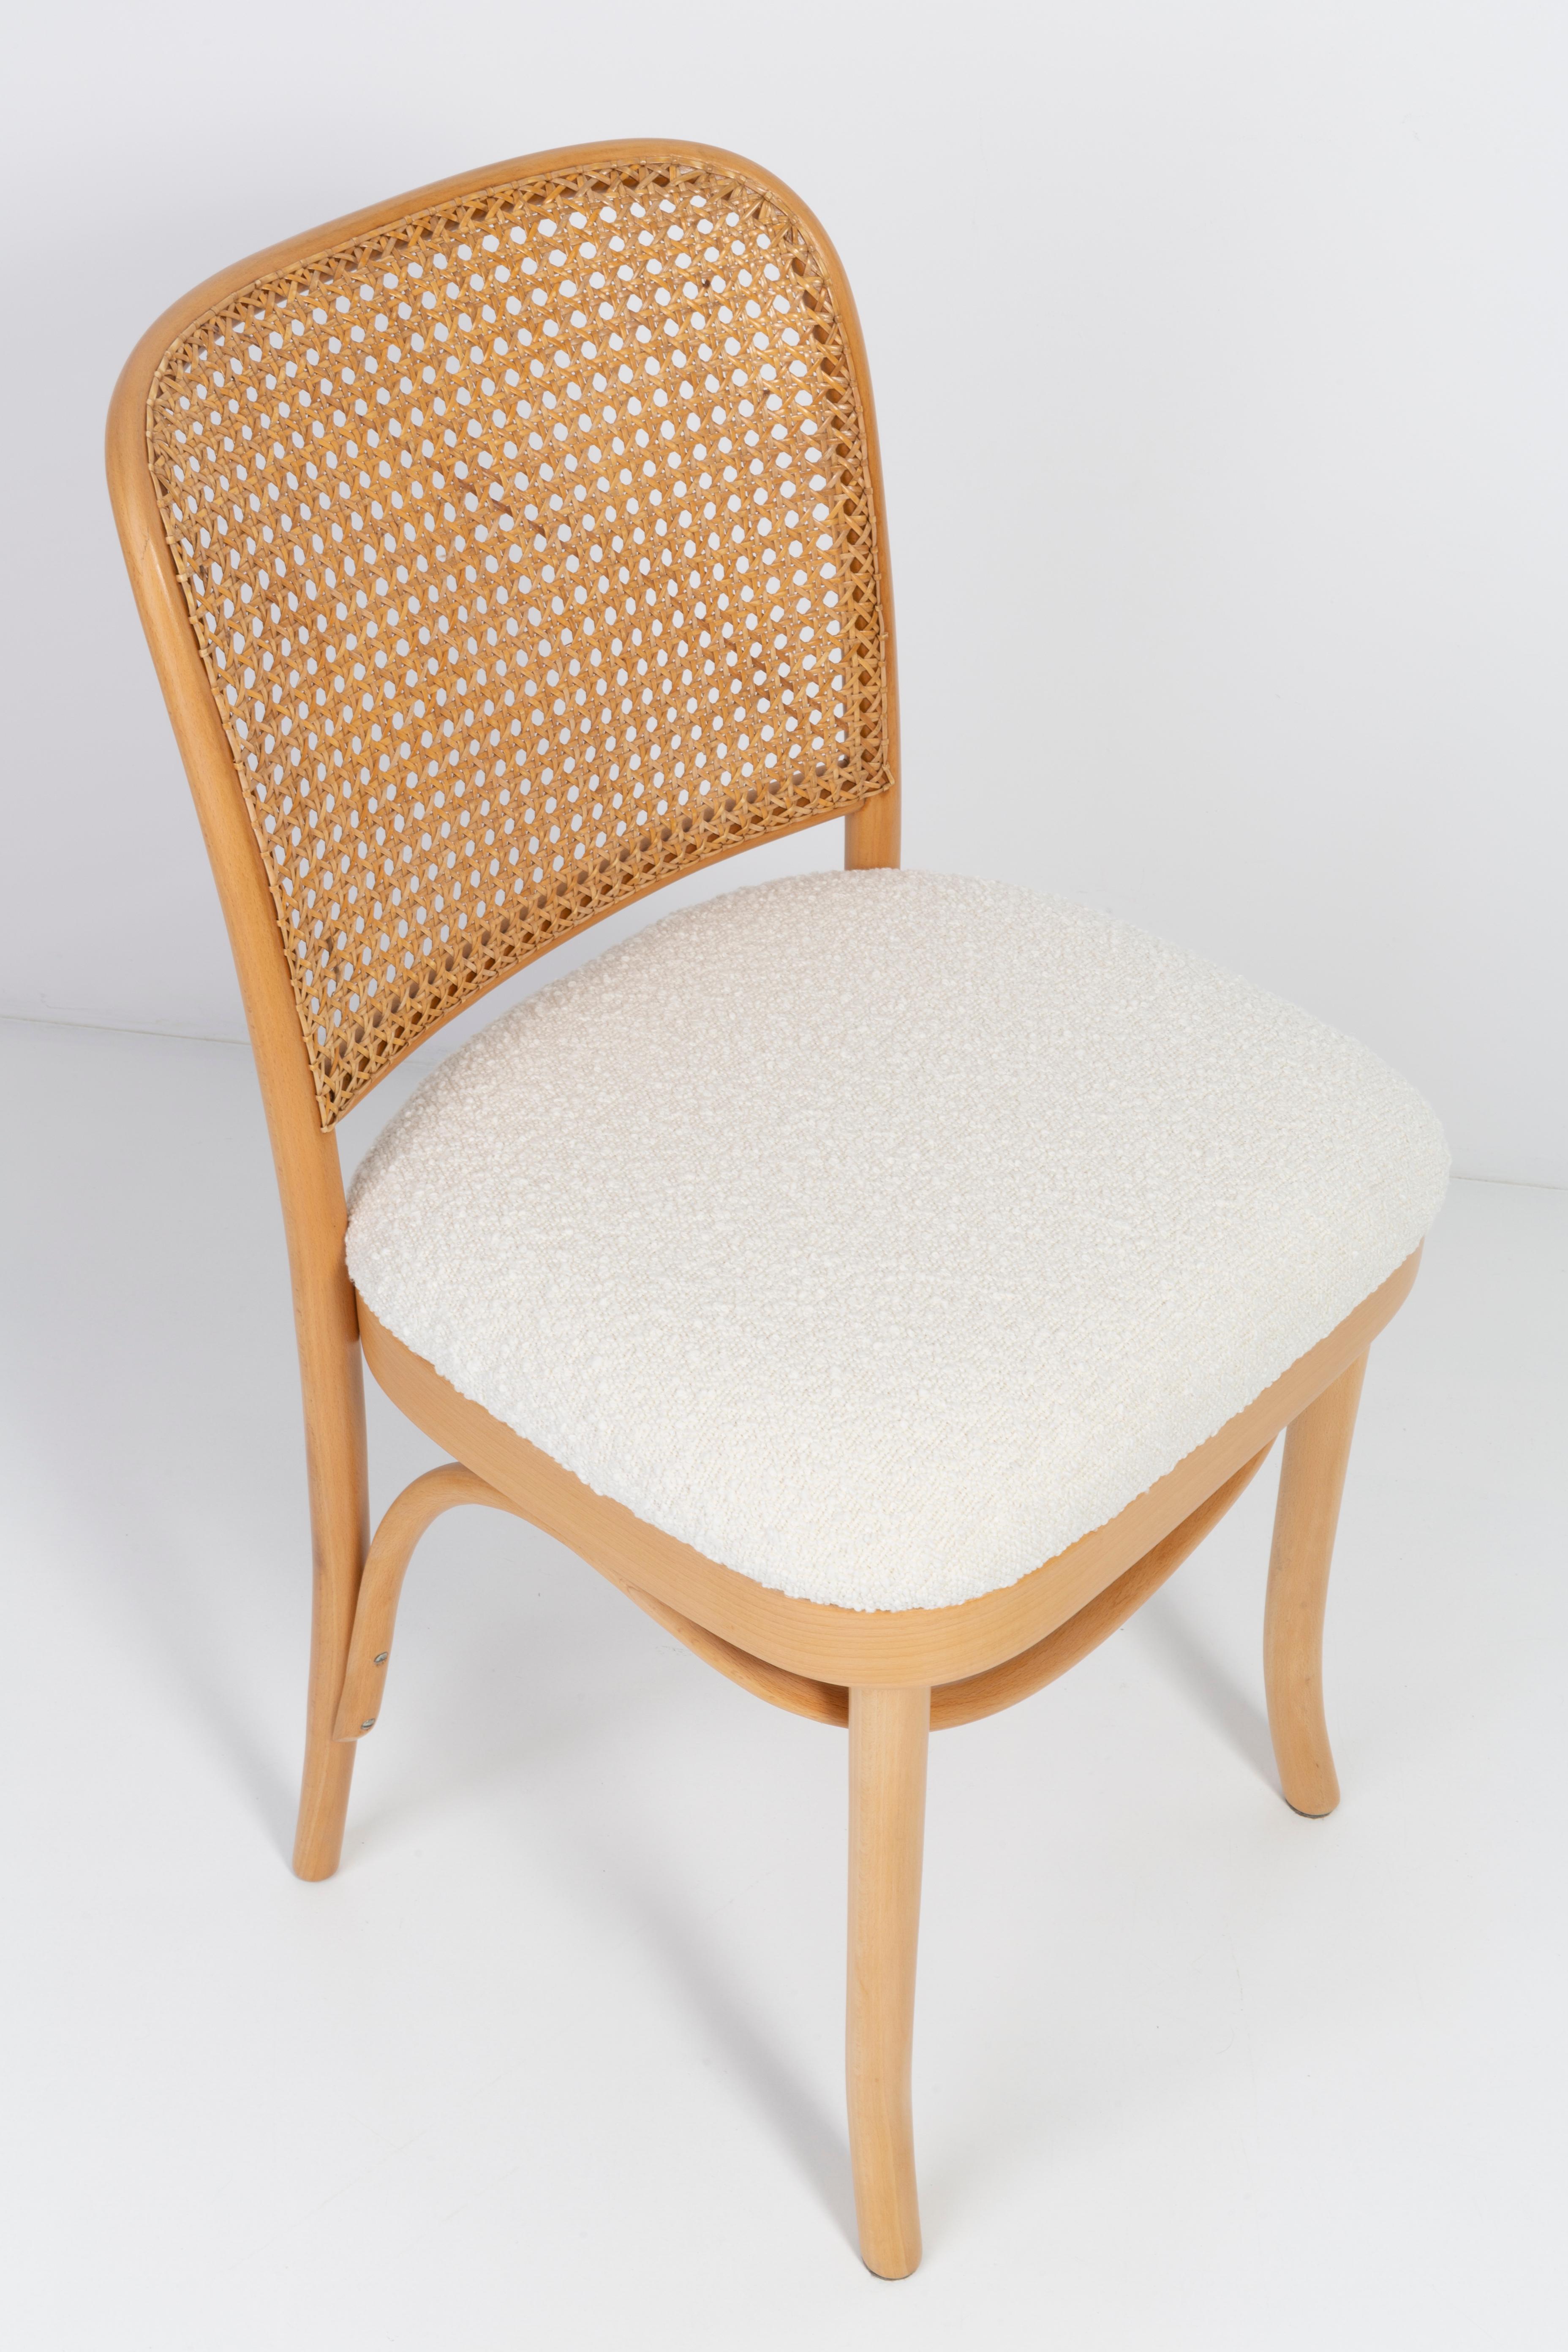 Set of Four White Boucle Thonet Wood Rattan Chairs, 1960s For Sale 1